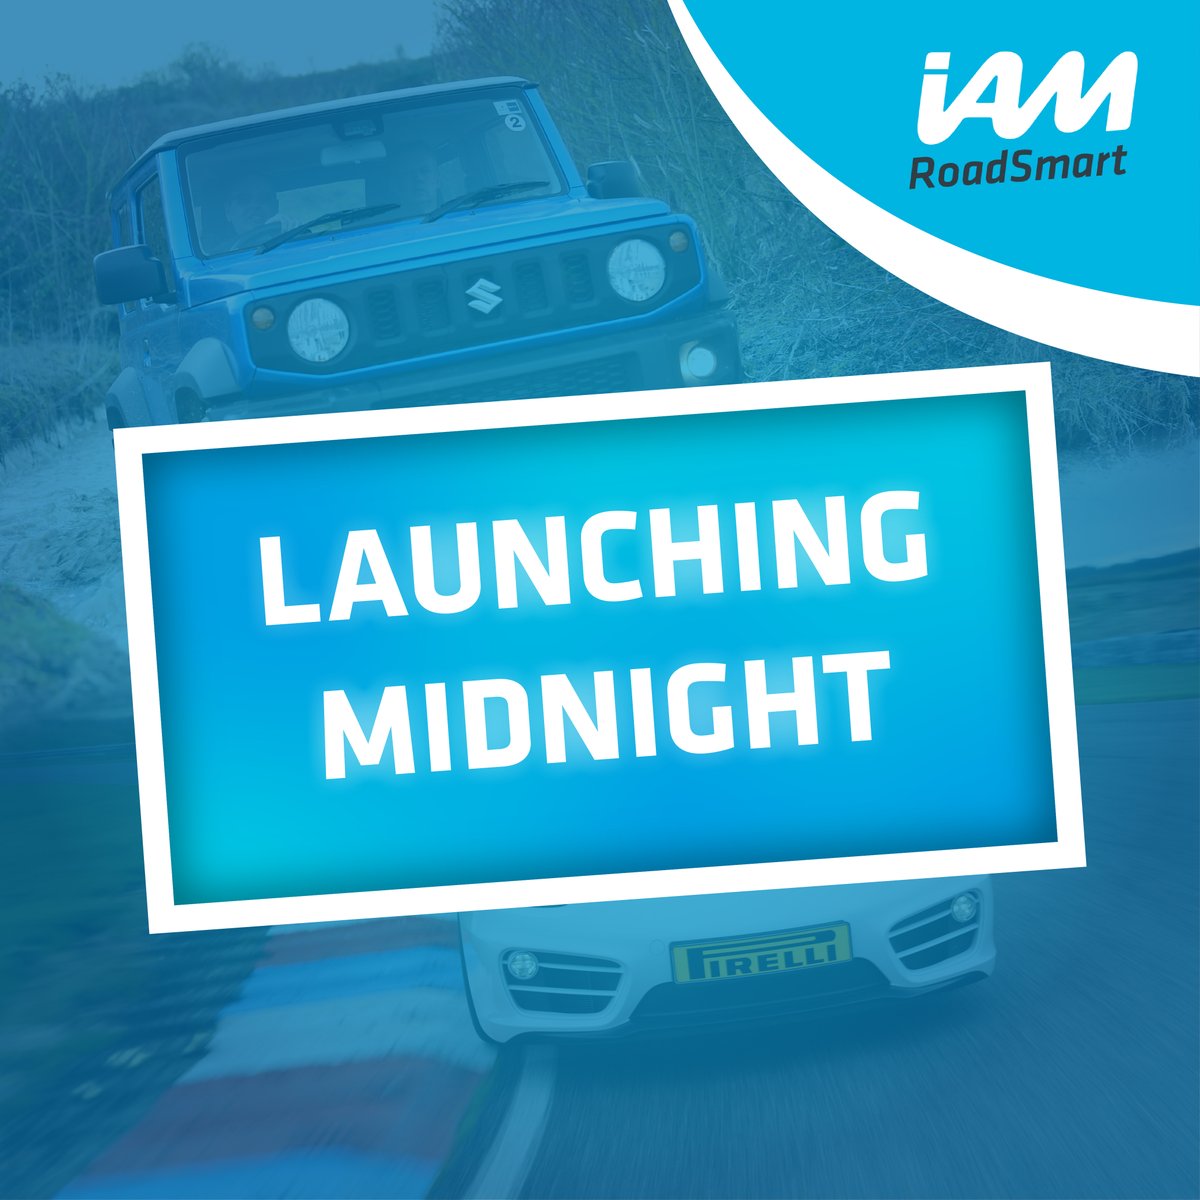 🚀 Launching Midnight! 🚀 Don’t miss your chance to attend our first Young Driver Skills Day! A unique opportunity for 17-30-year-olds to learn new skills and enhance their driving knowledge with a thrilling half-day at Thruxton Circuit. Check back tomorrow for details!🎉